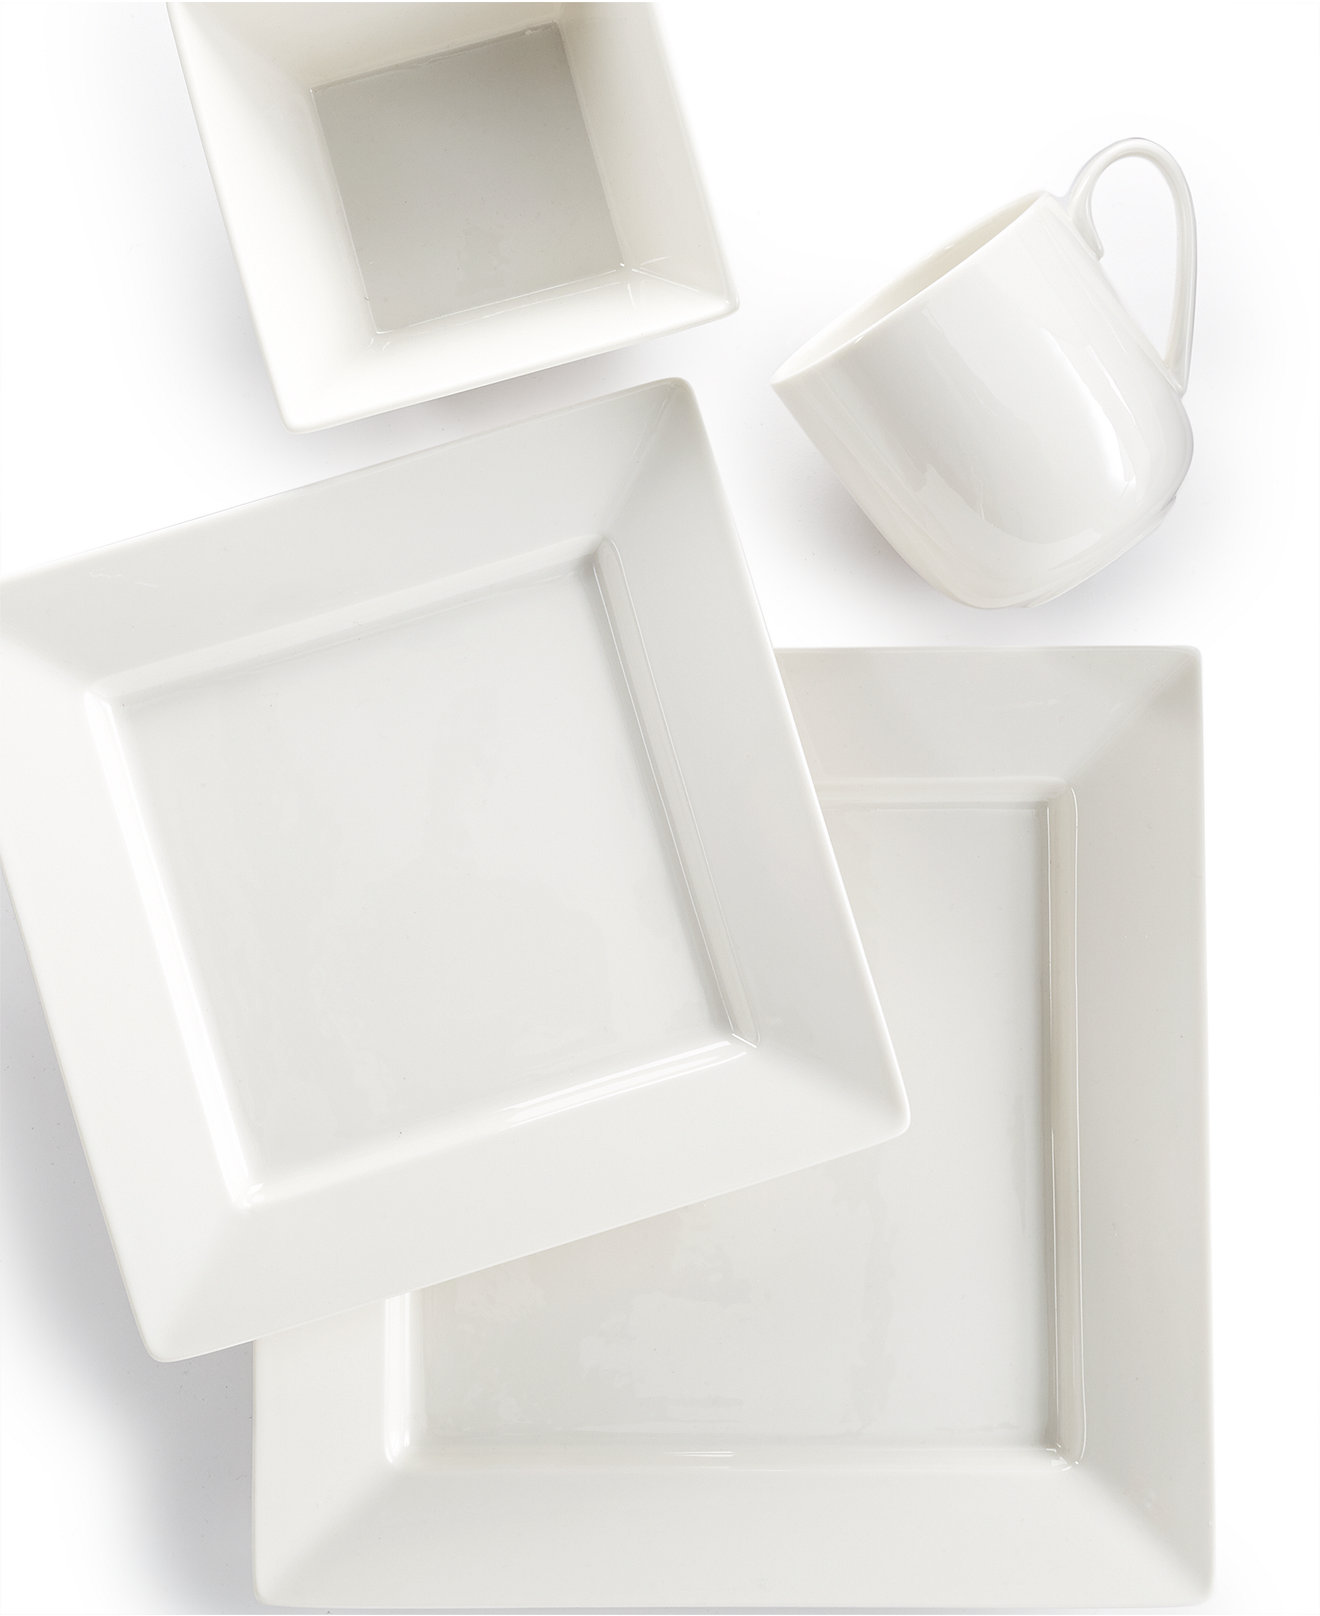 What do reviews typically say about Martha Stewart dinnerware?